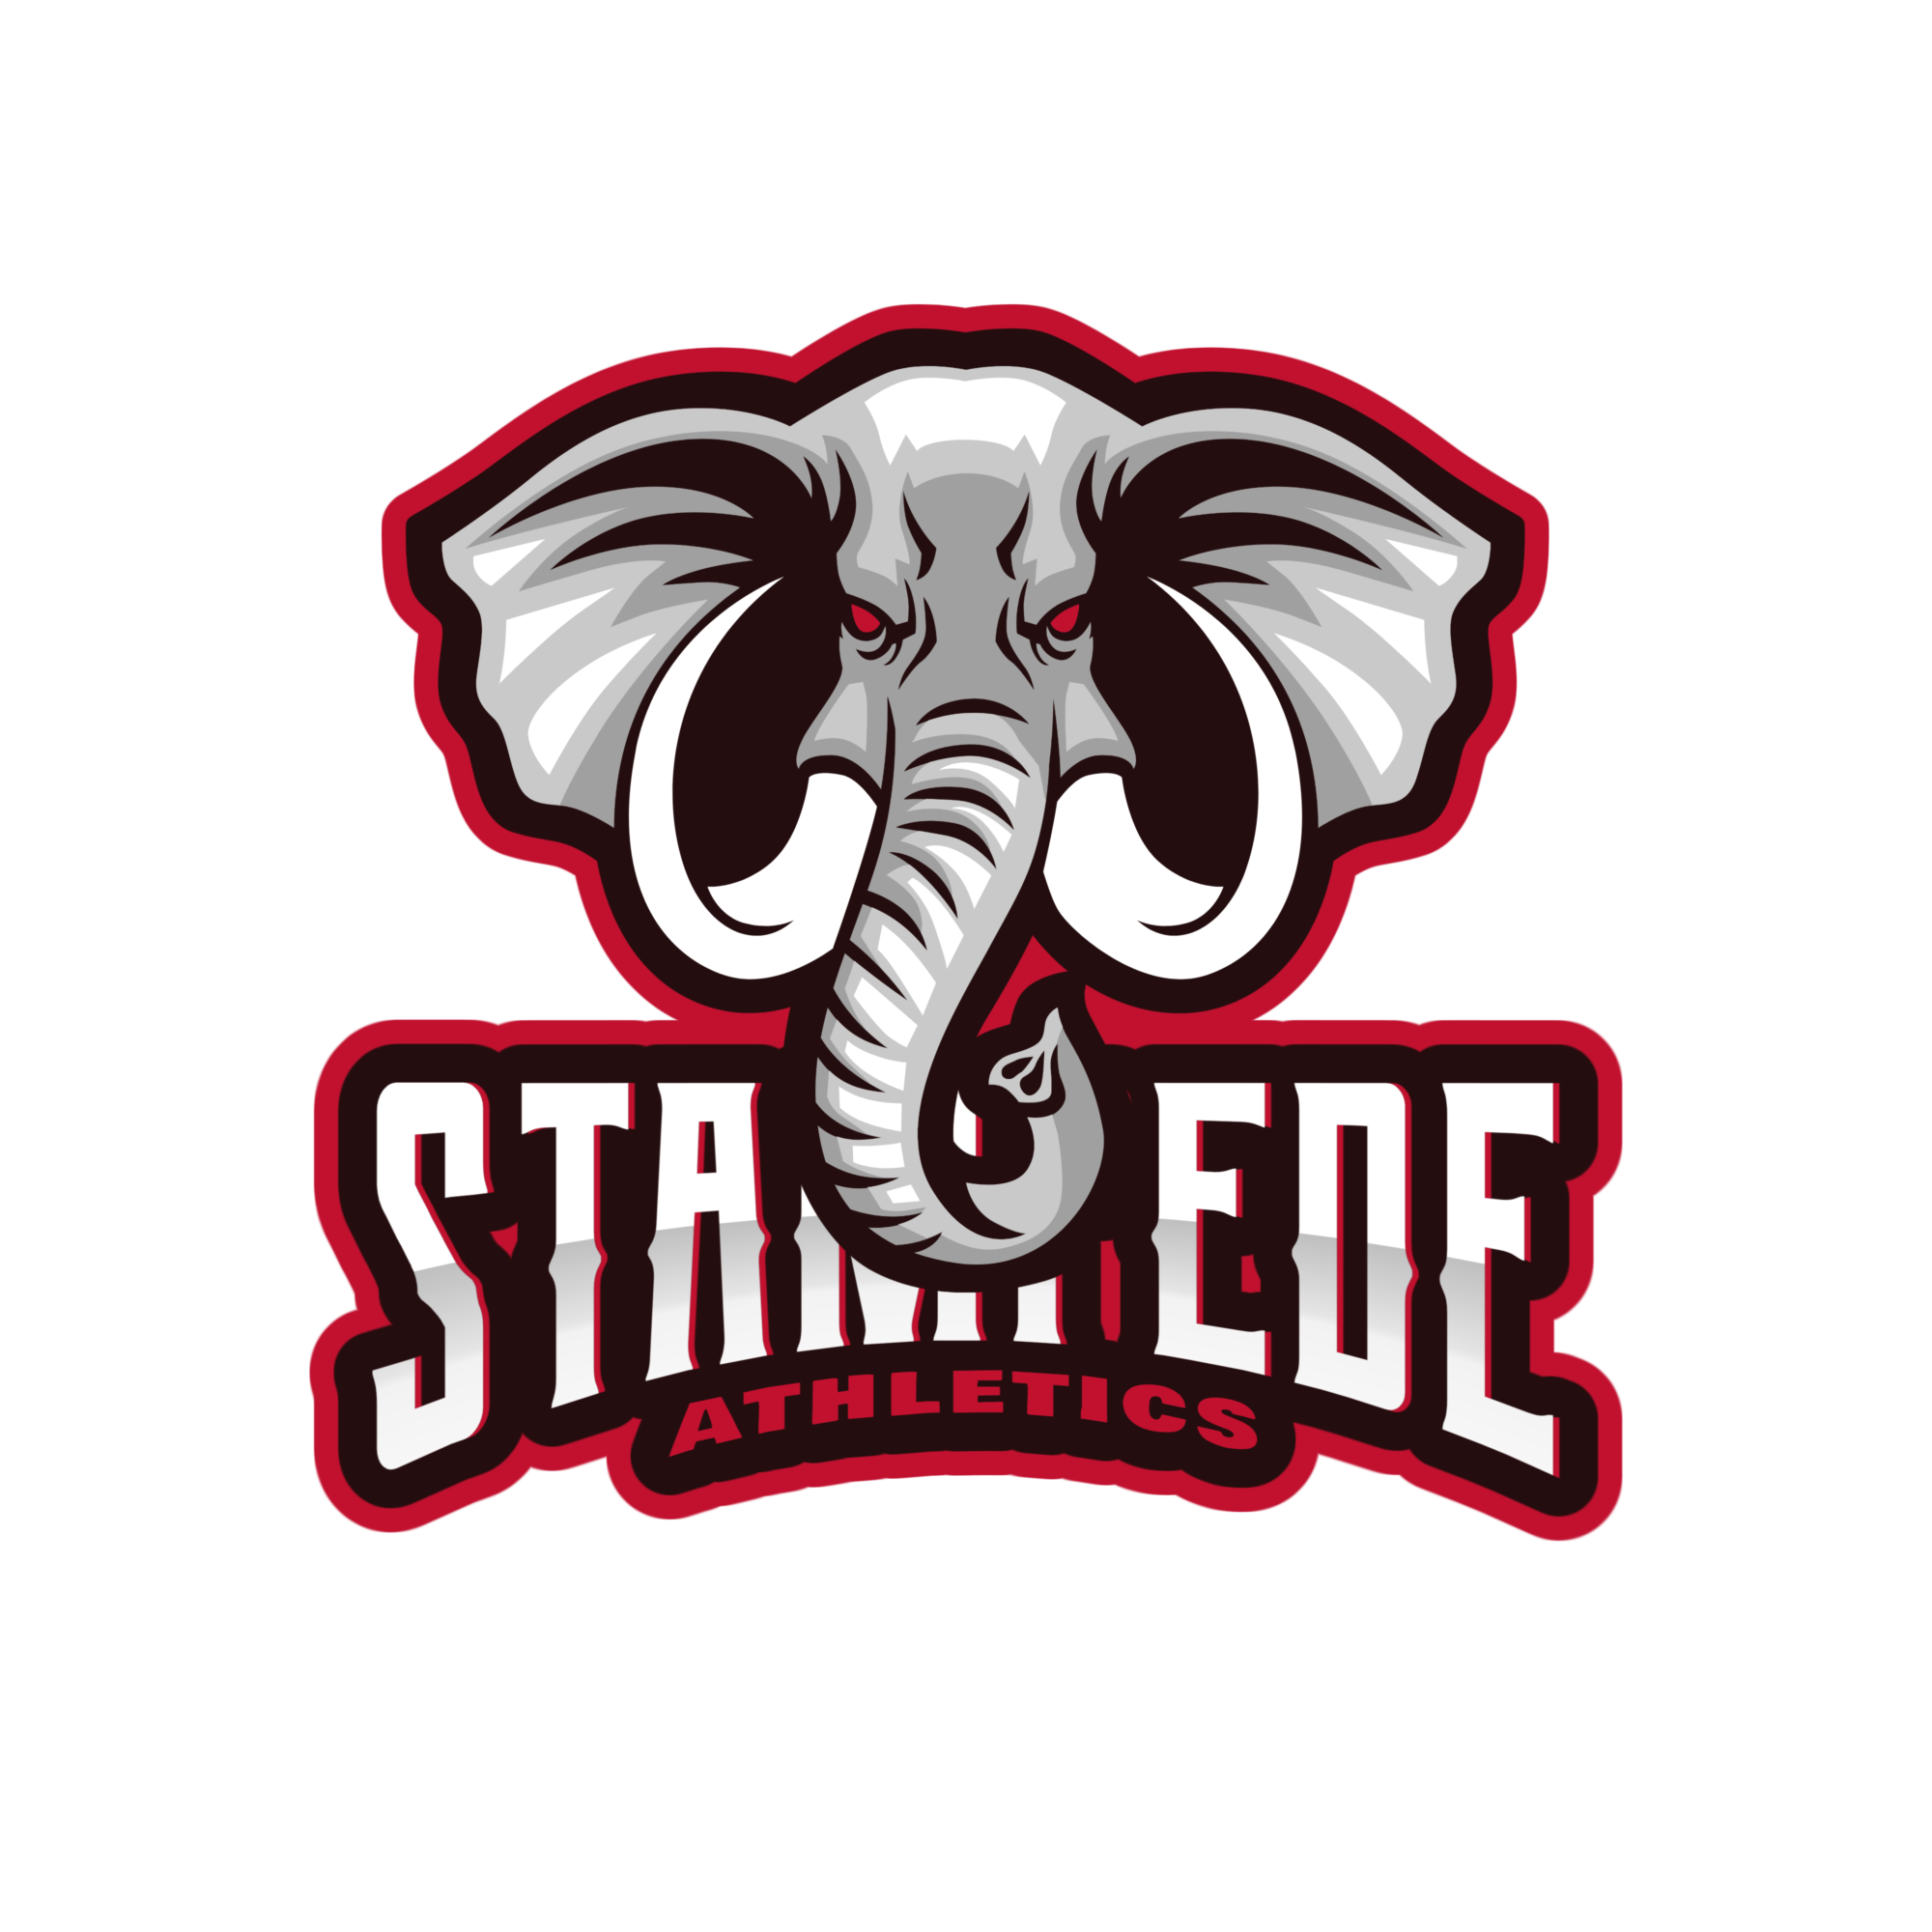 Stampede Athletics, Icon and Text - Large Logo